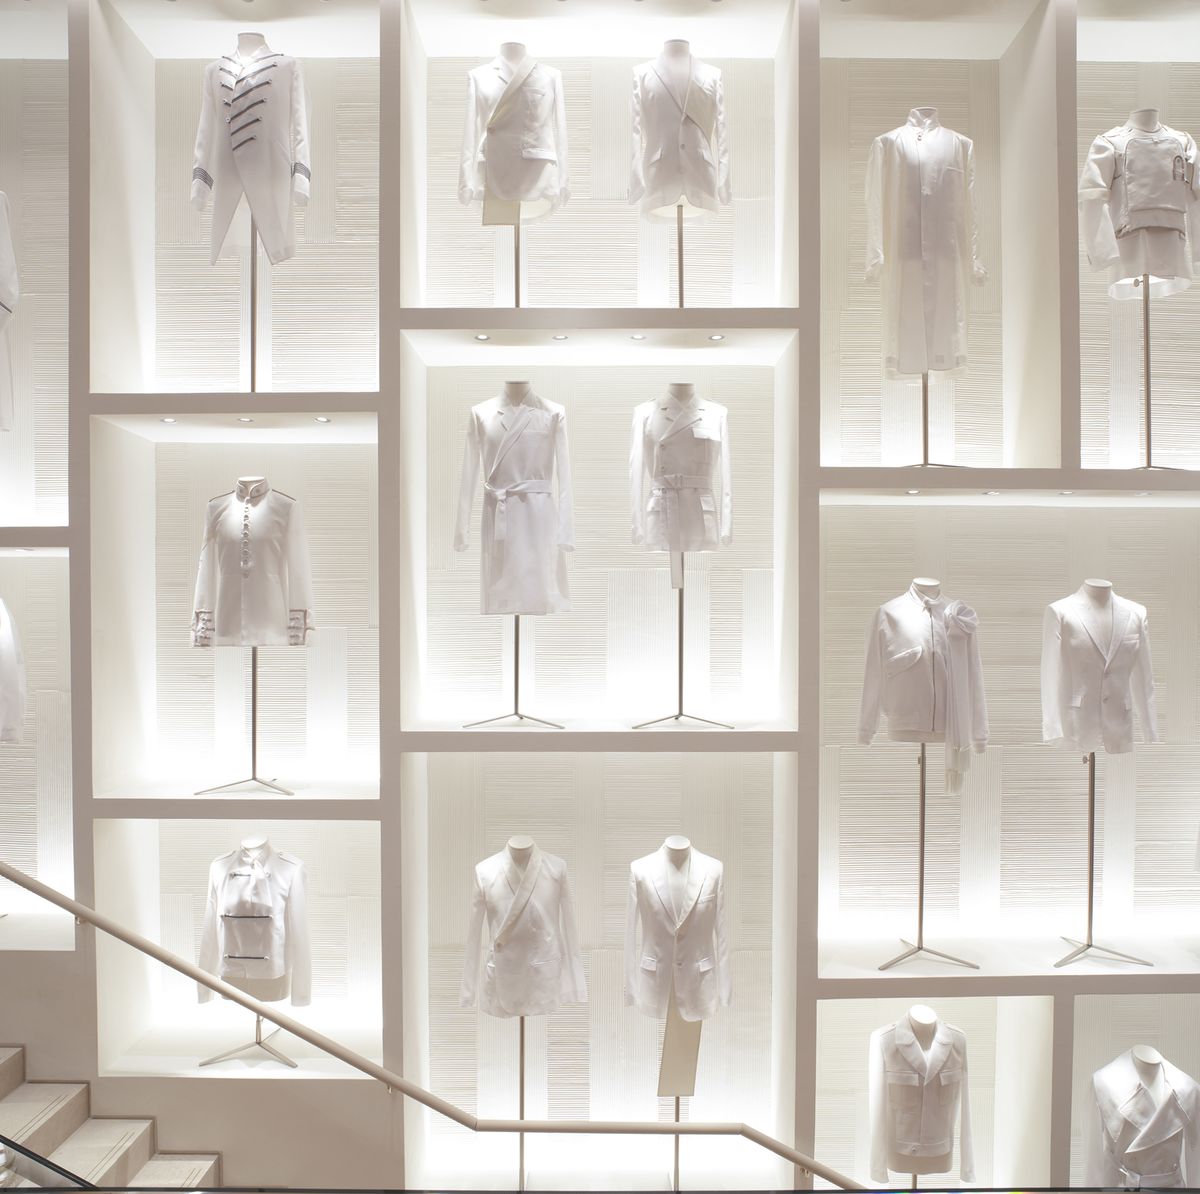 A view of the Dior store Avenue Montaigne on April 30, 2020 in